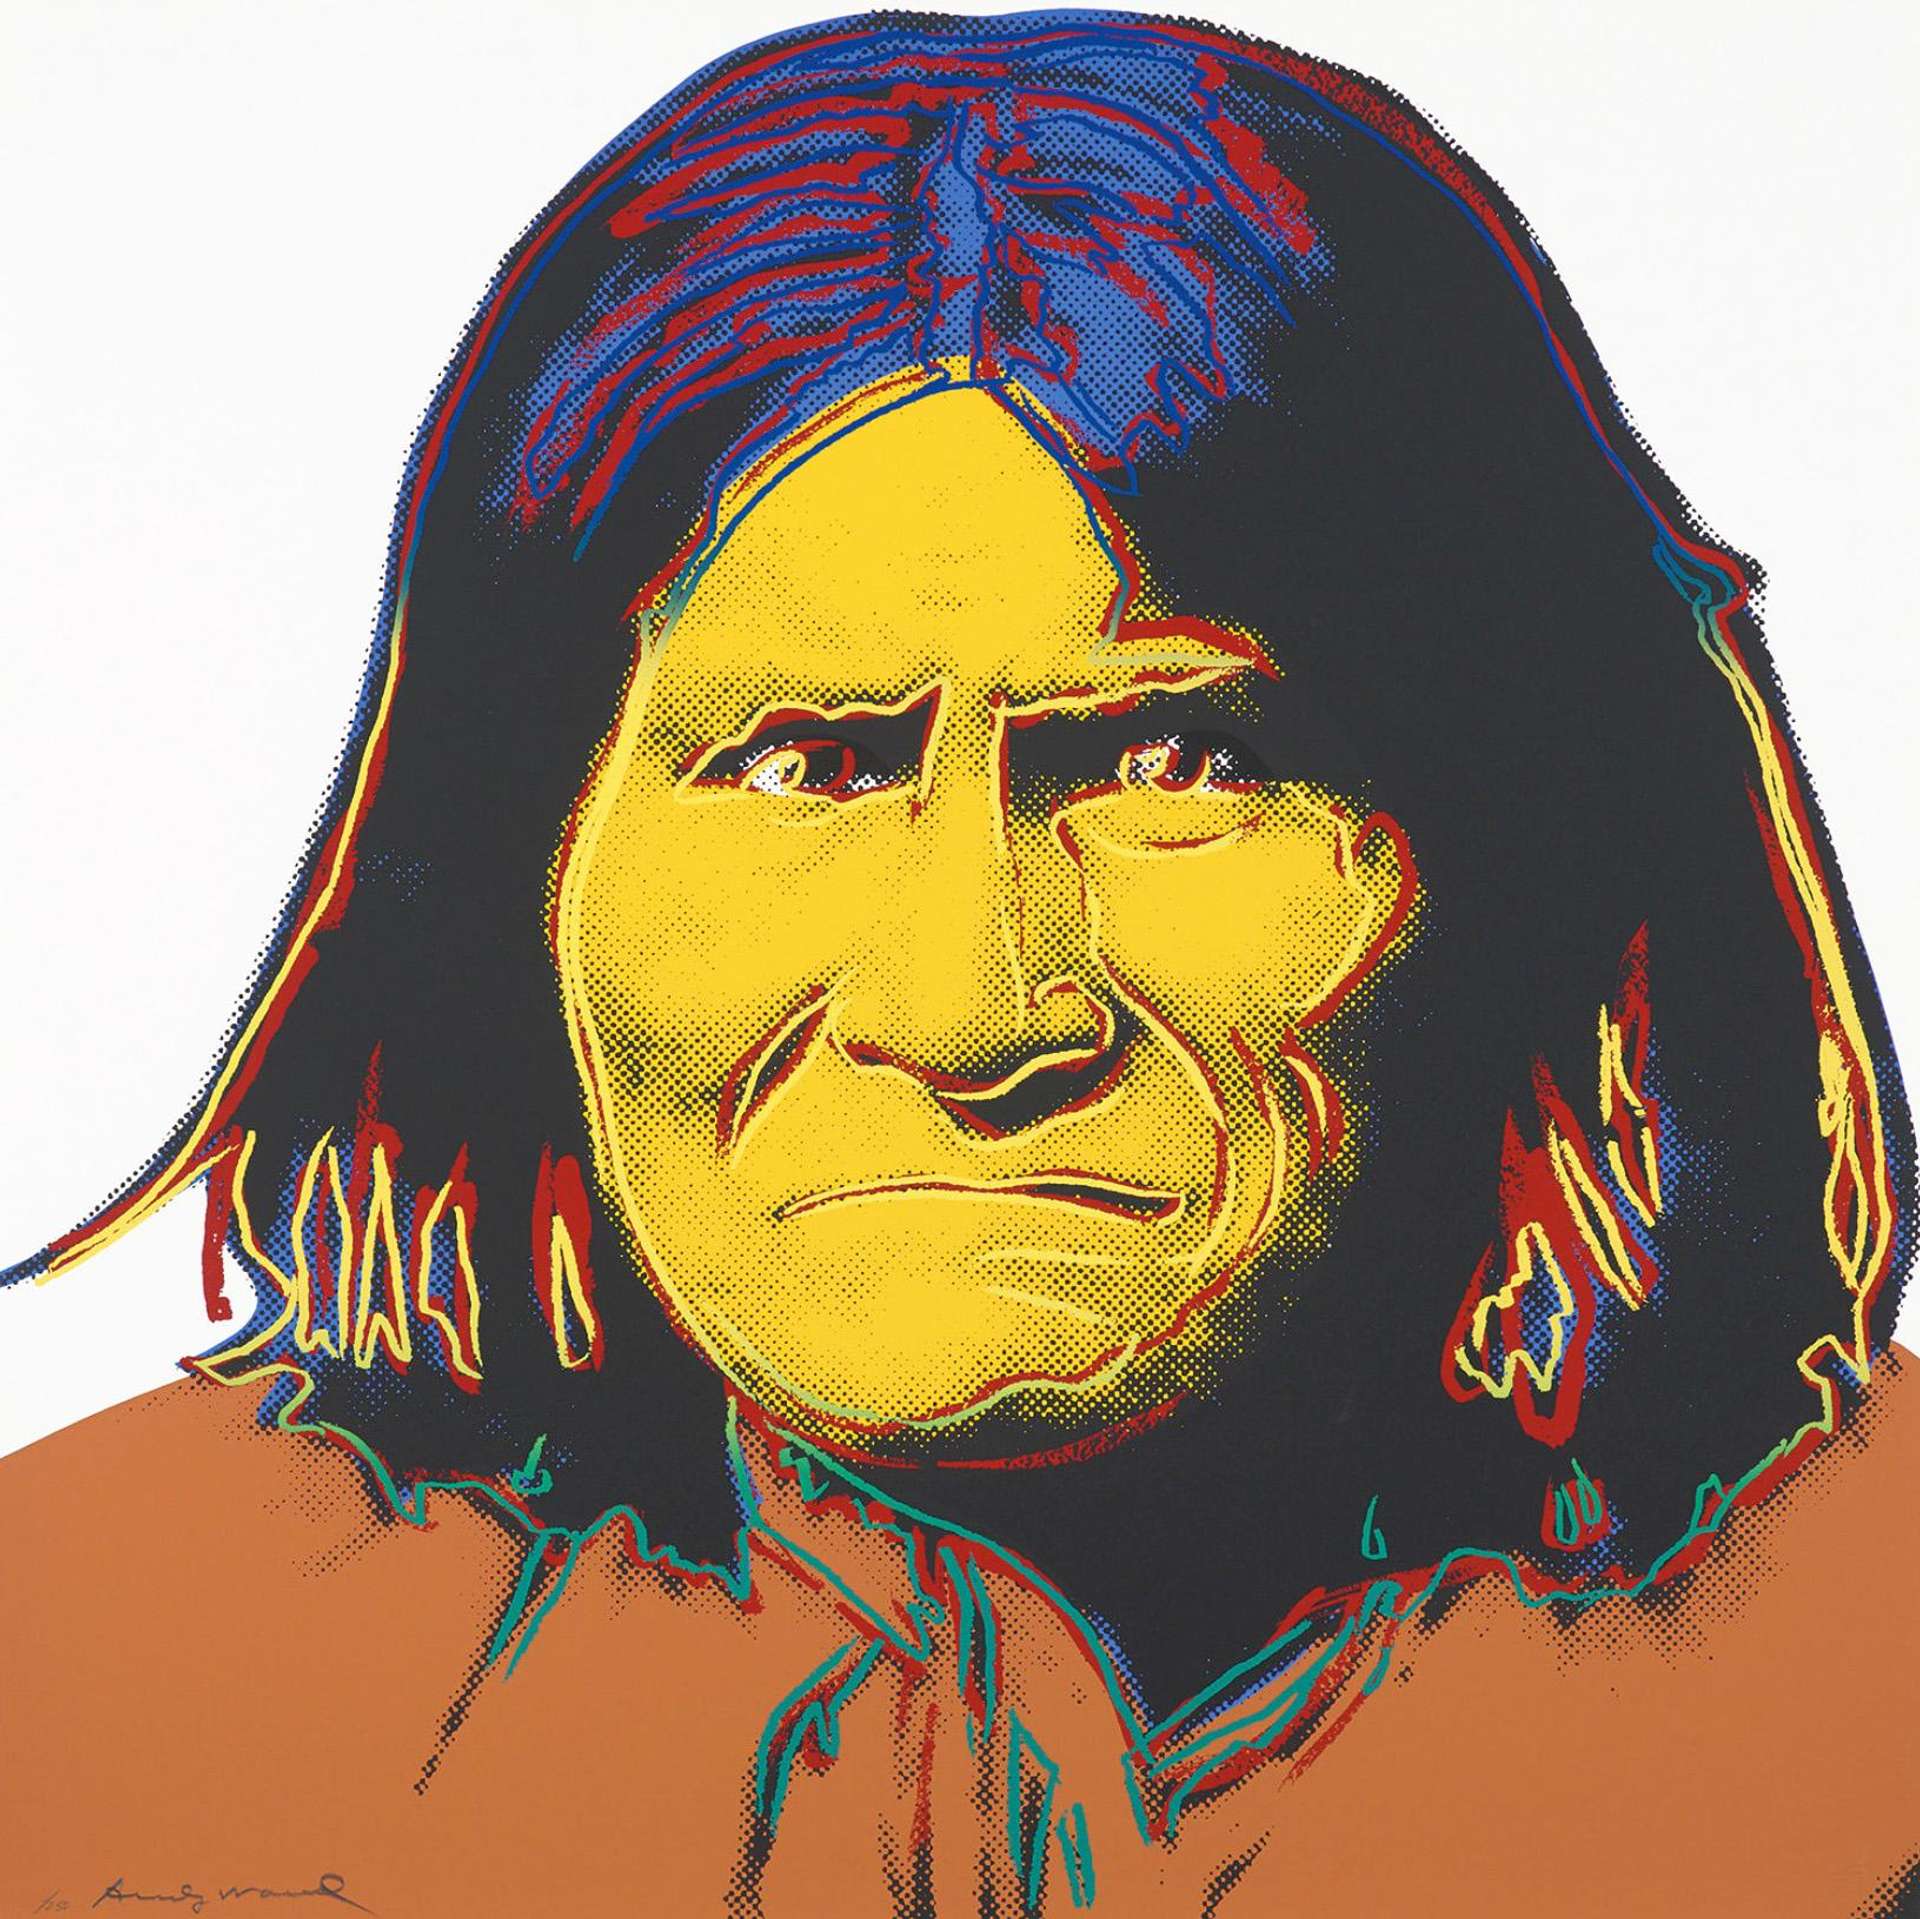 A screenprint by Andy Warhol depicting Geronimo's portrait in bright yellow against a white background.